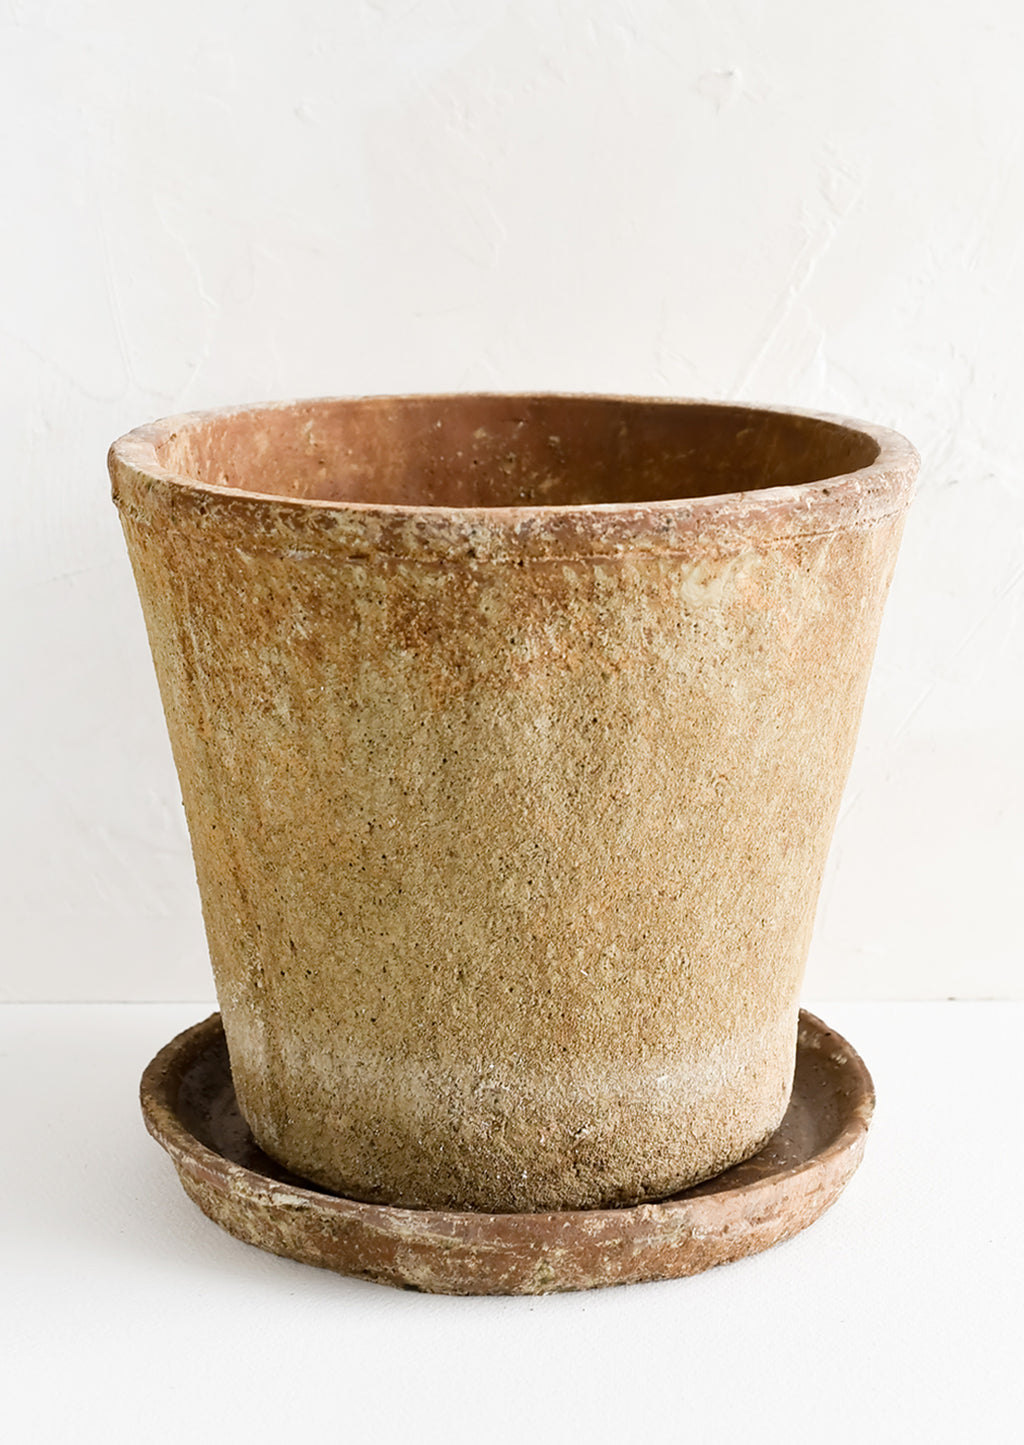 Large: A rustic, heavily textured terracotta clay planter with saucer.